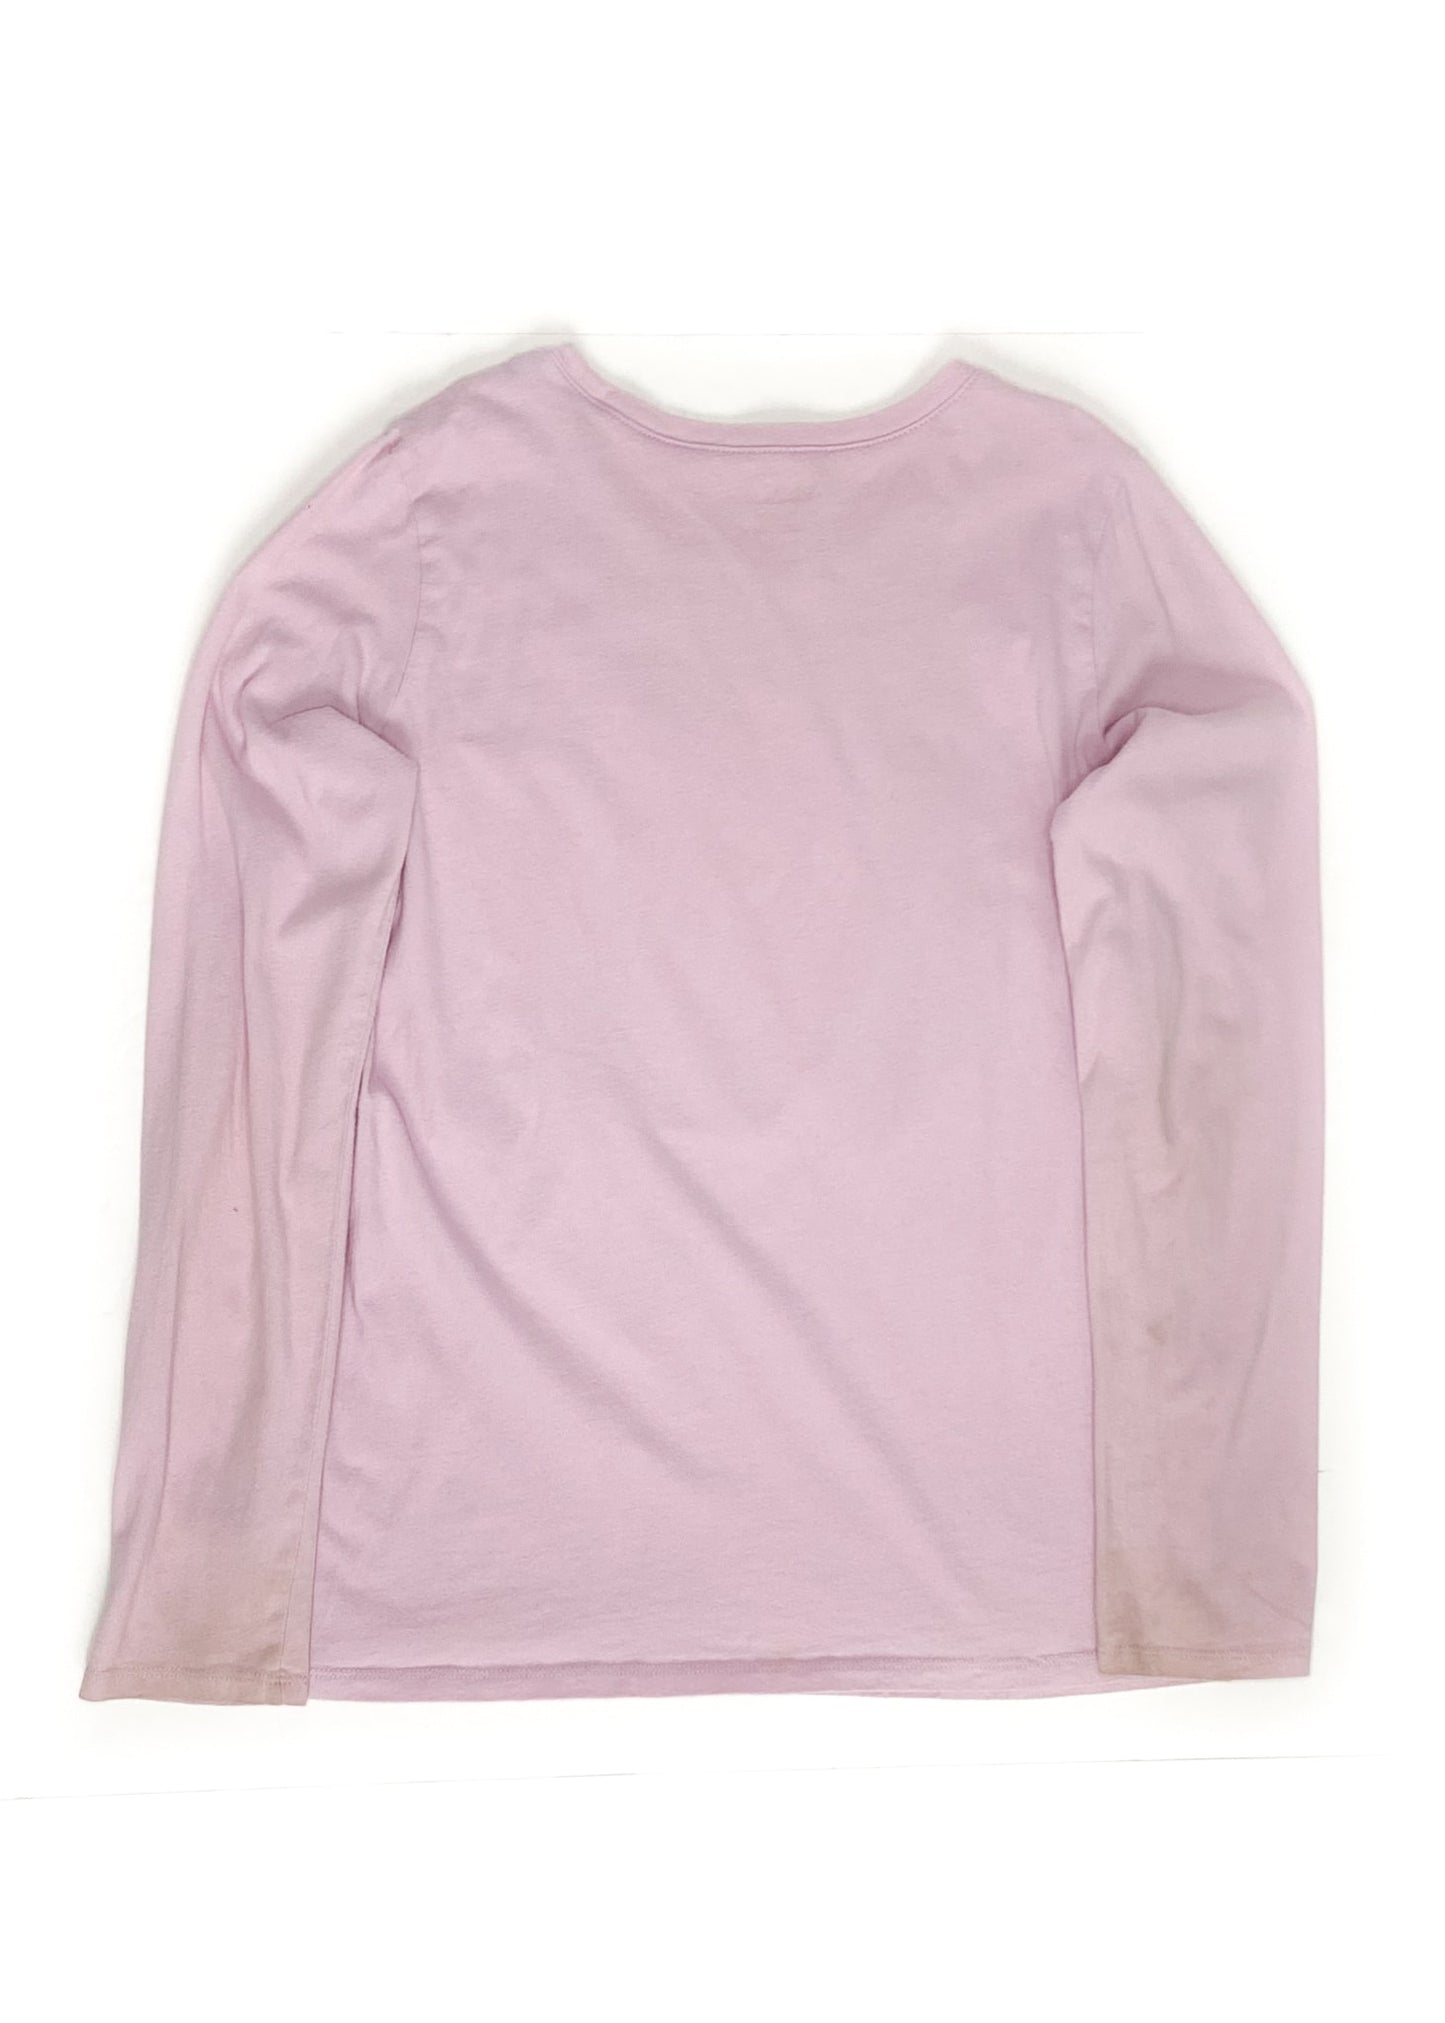 The Children's Place Long Sleeve Shirt - Pink - Youth XL